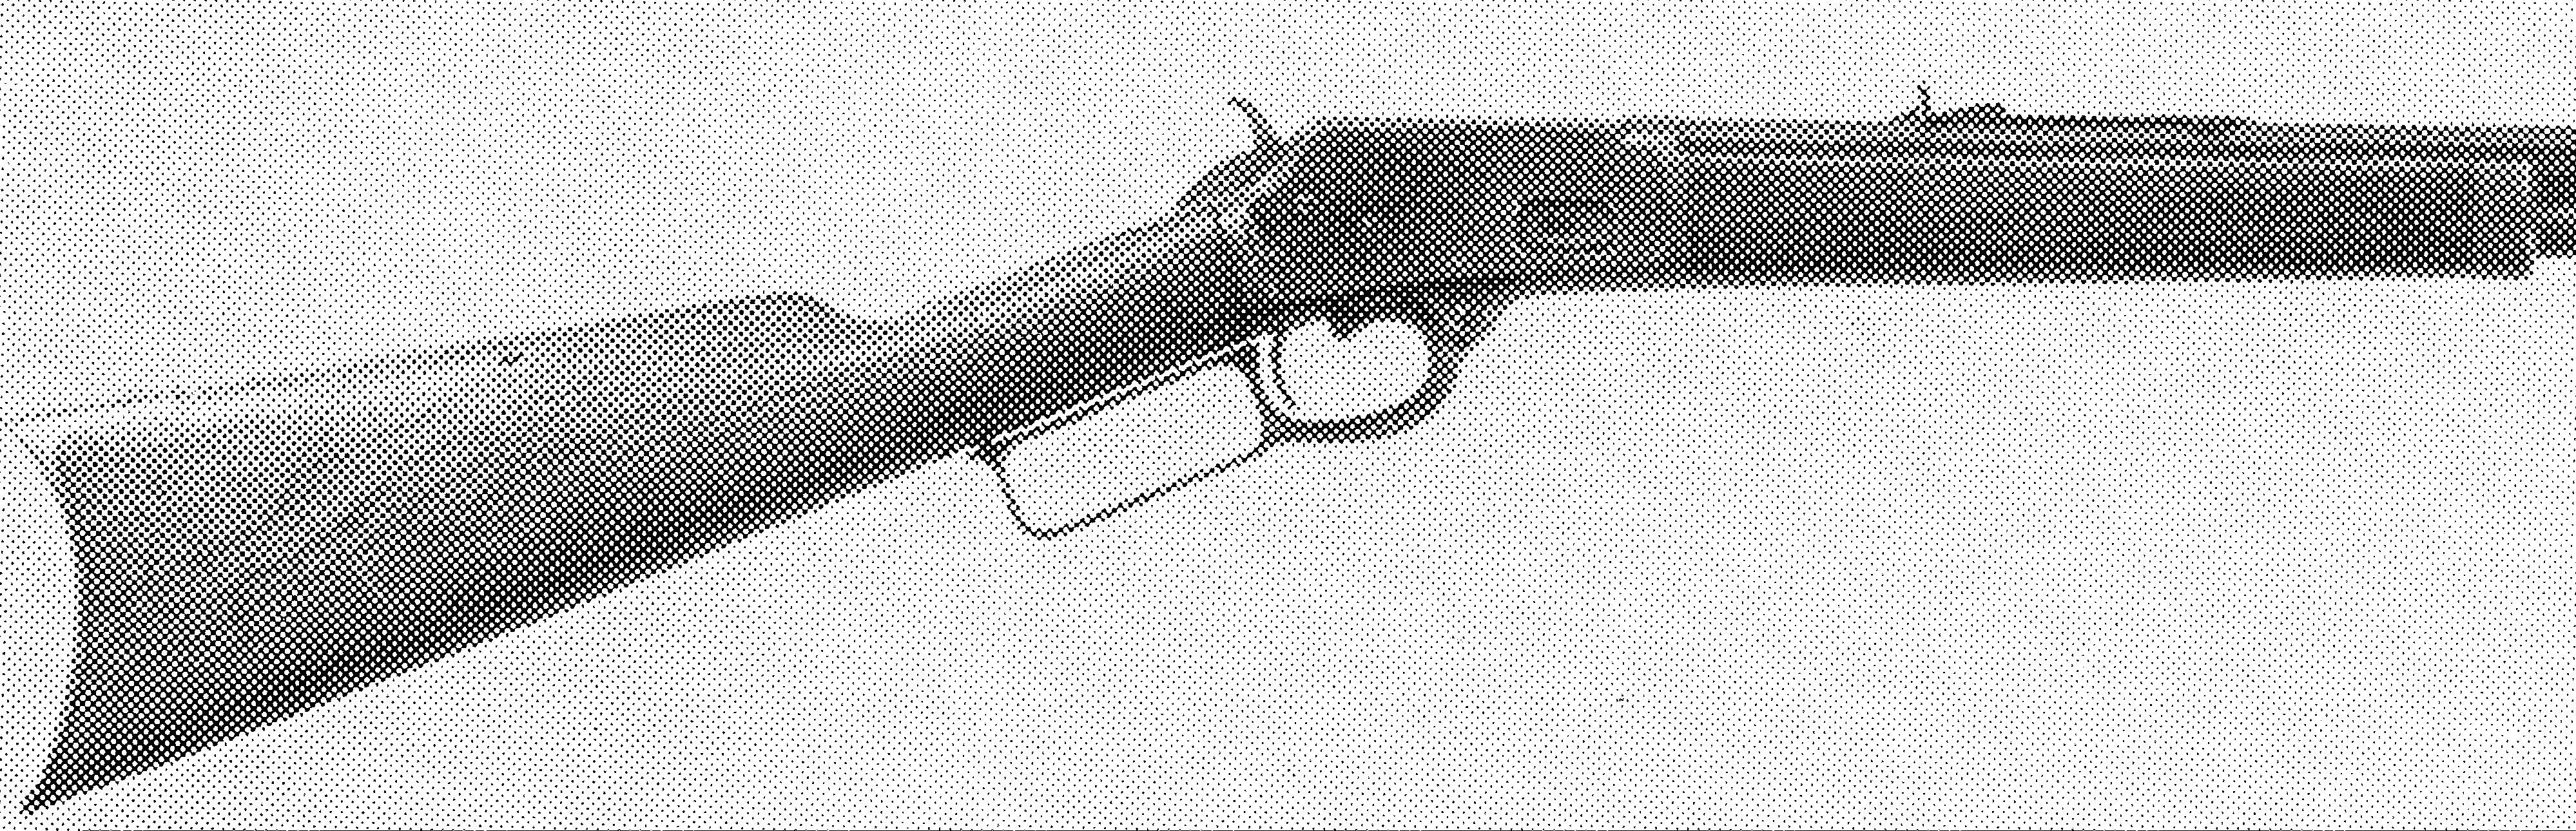 Model 1888 Lever-Action Rifle